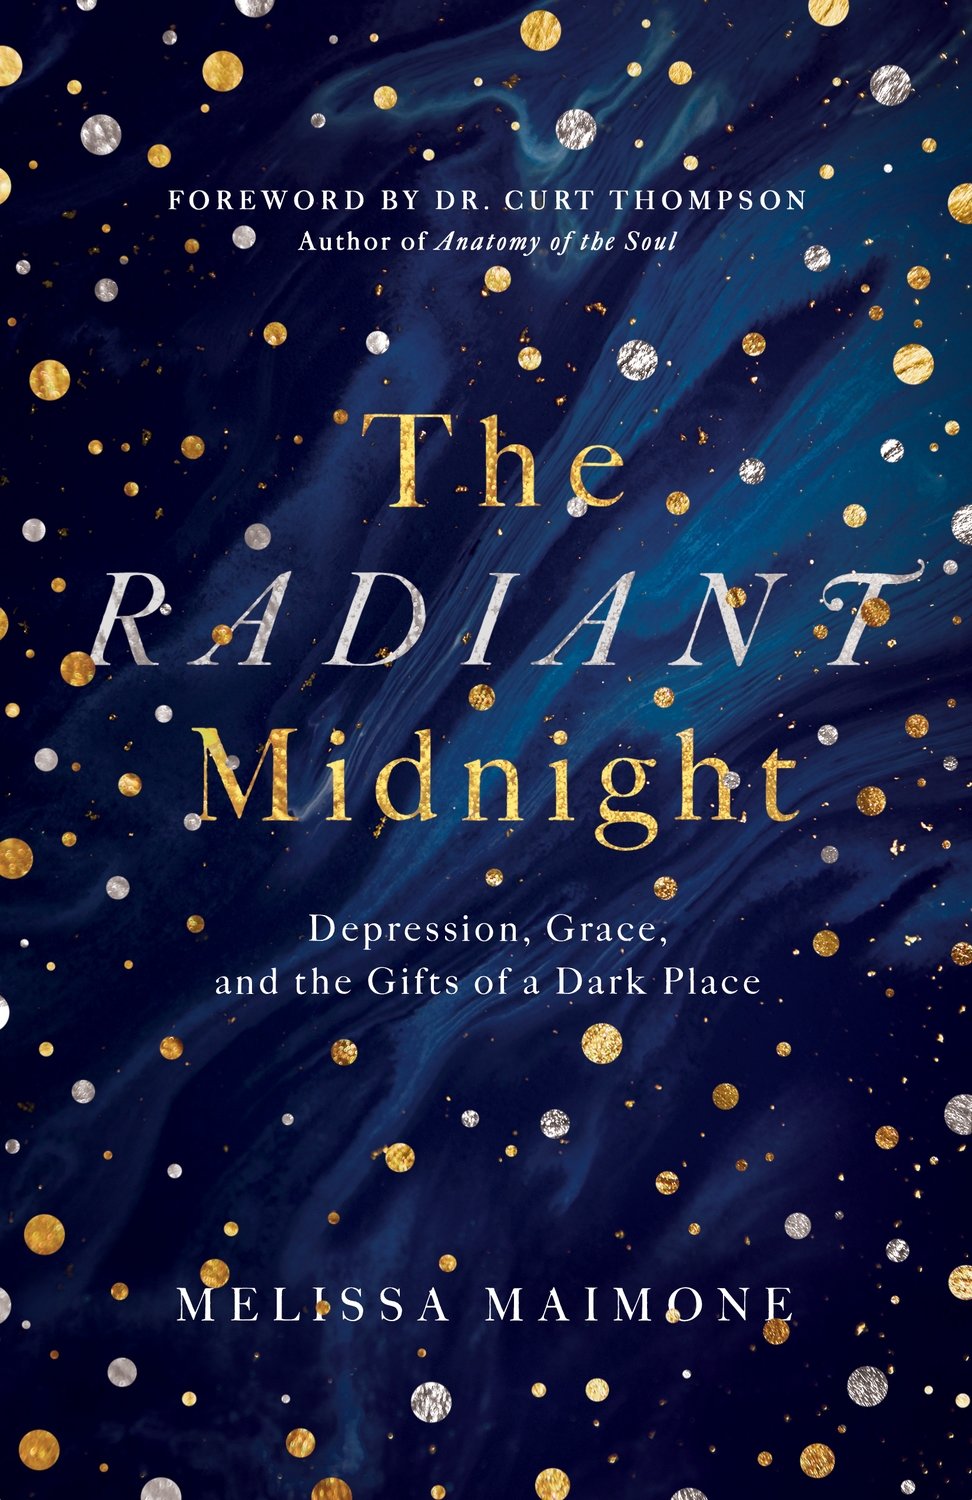 1. The Radiant Midnight: Depression, Grace, and the Gifts of a Dark Place